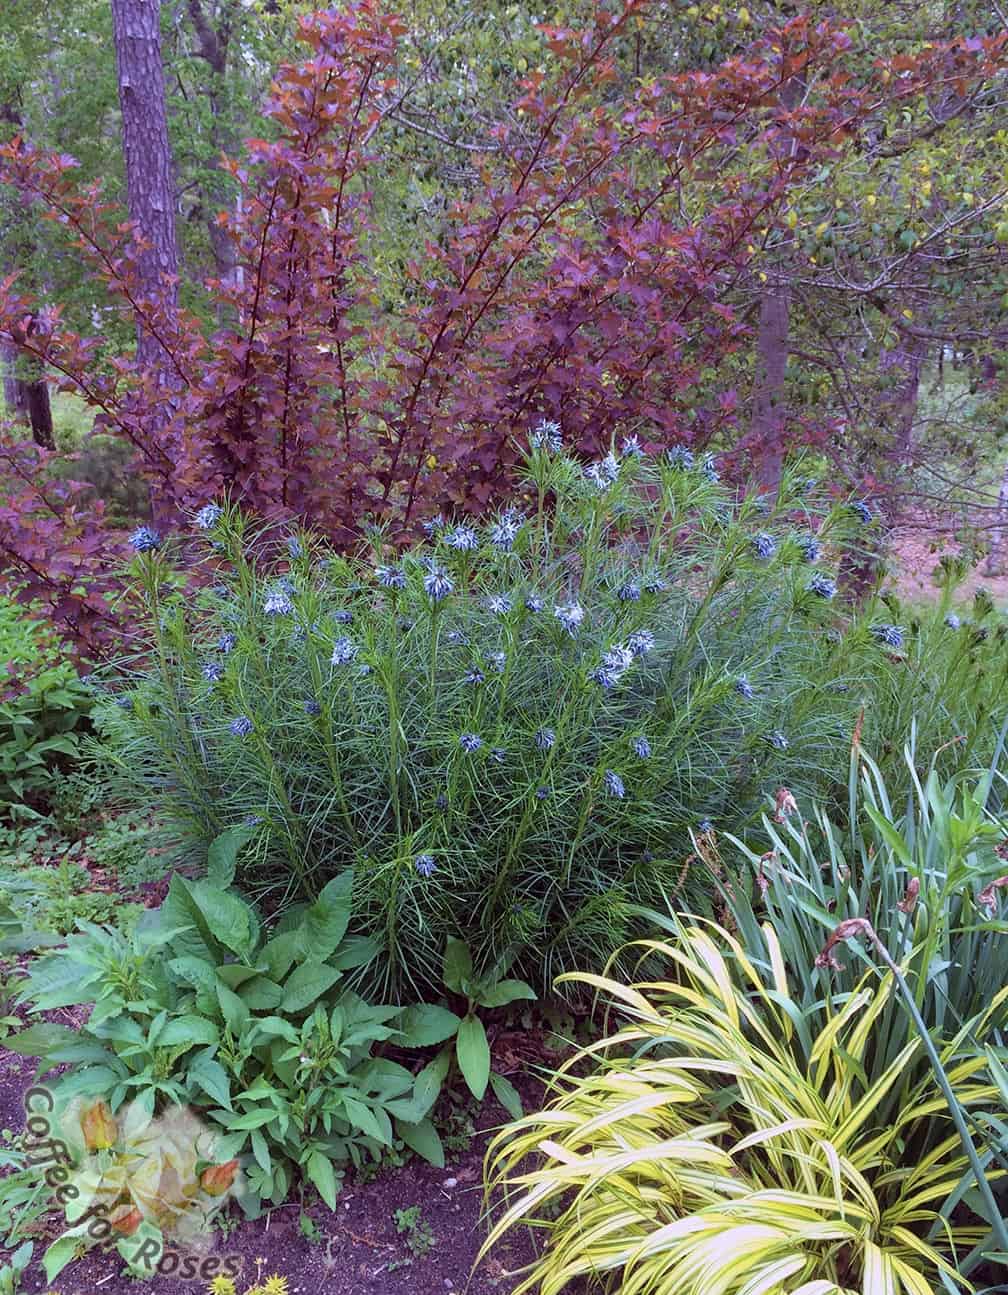 Yesterday I was appreciating this section of my garden. The purple foliage of the Center Glow ninebark (Physocarpus opulifolius 'Center Glow'), the fine green of the Amsonia hubrichtii (which will be bright yellow in the fall) and the graceful butter yellow of the Hakonechloa macra aureola works perfectly with the larger green leaves of the Patrinia (lower left) which travels around this garden.